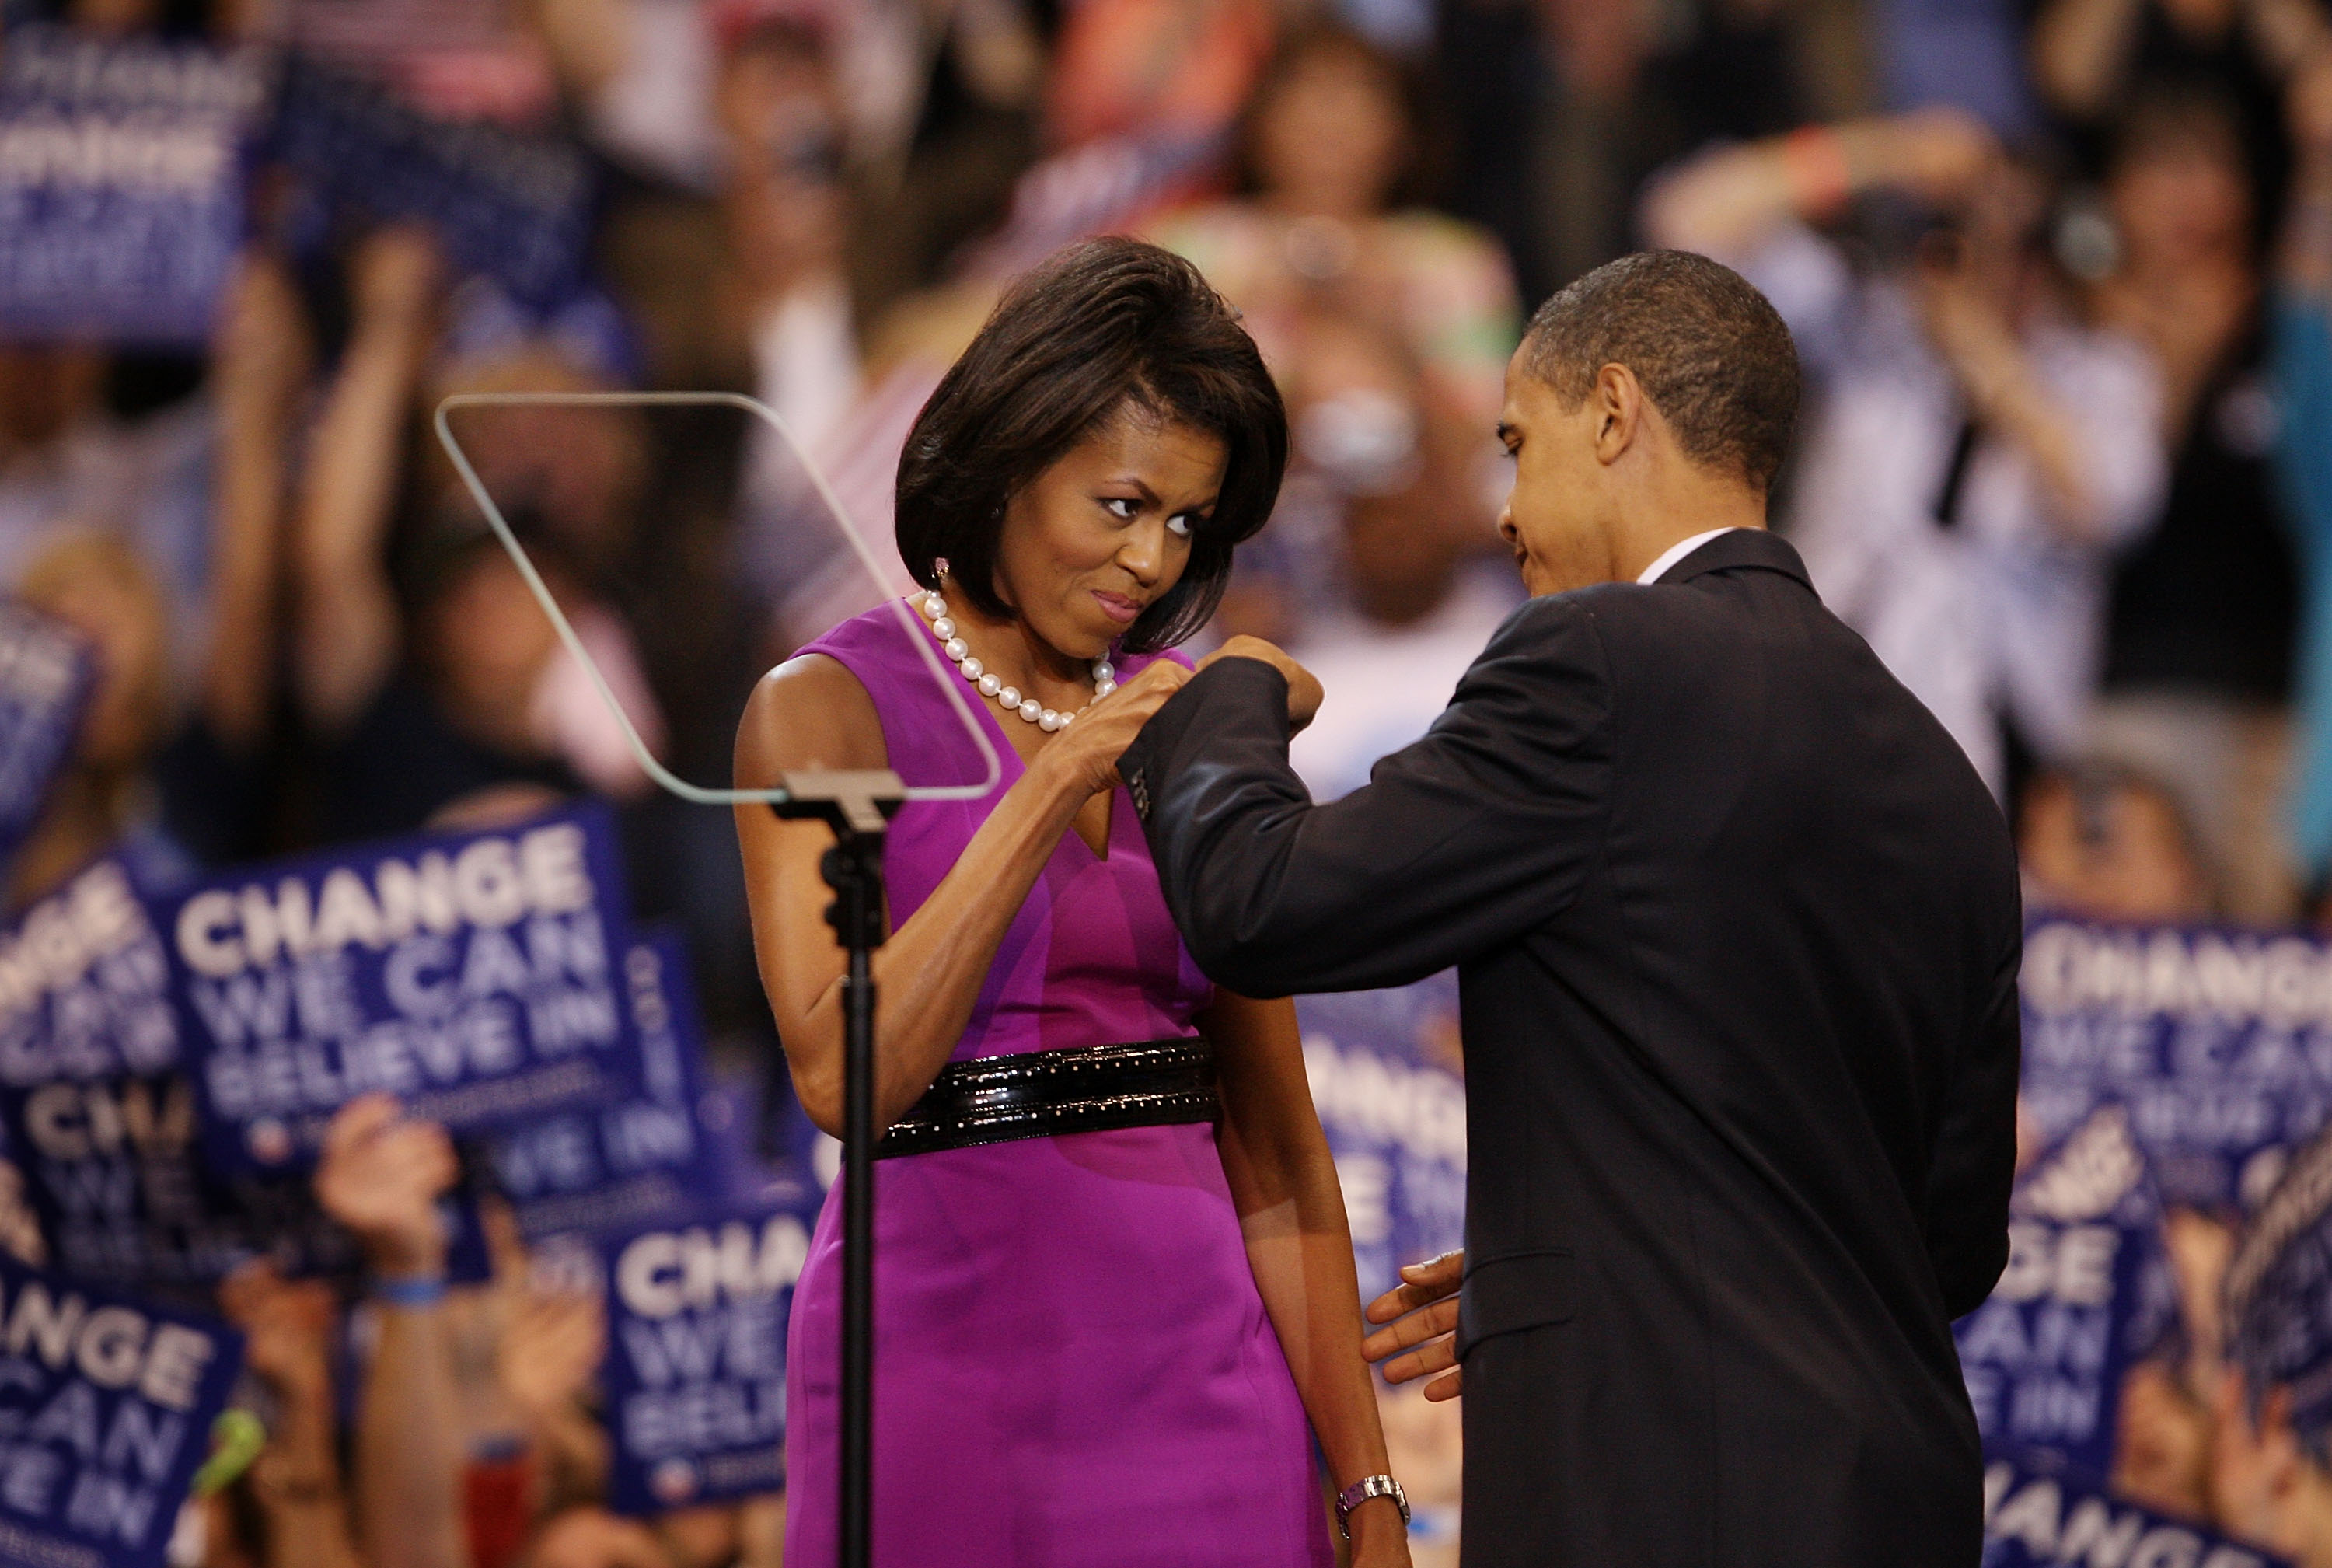 From right: U.S. President Barack Obama and First Lady Michelle Obama bump fists at an election night rally at the Xcel Energy Center on June 3, 2008 in St. Paul, Minn. during his first presidential campaign.